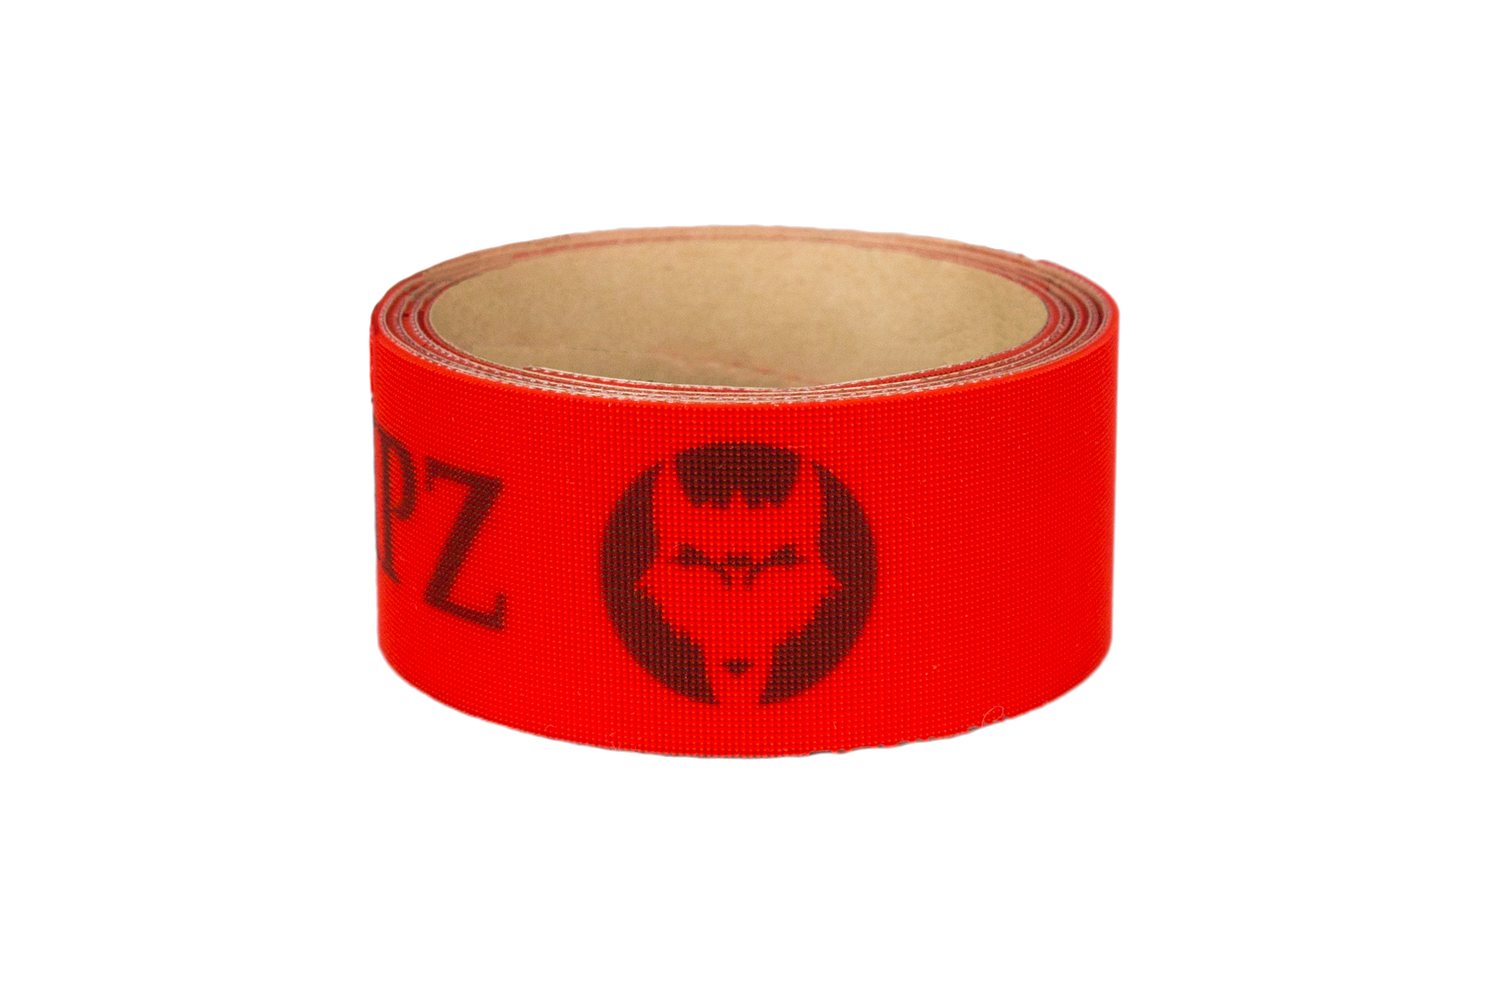 Red Lacrosse Tape | American Made and Legal Lax Tape